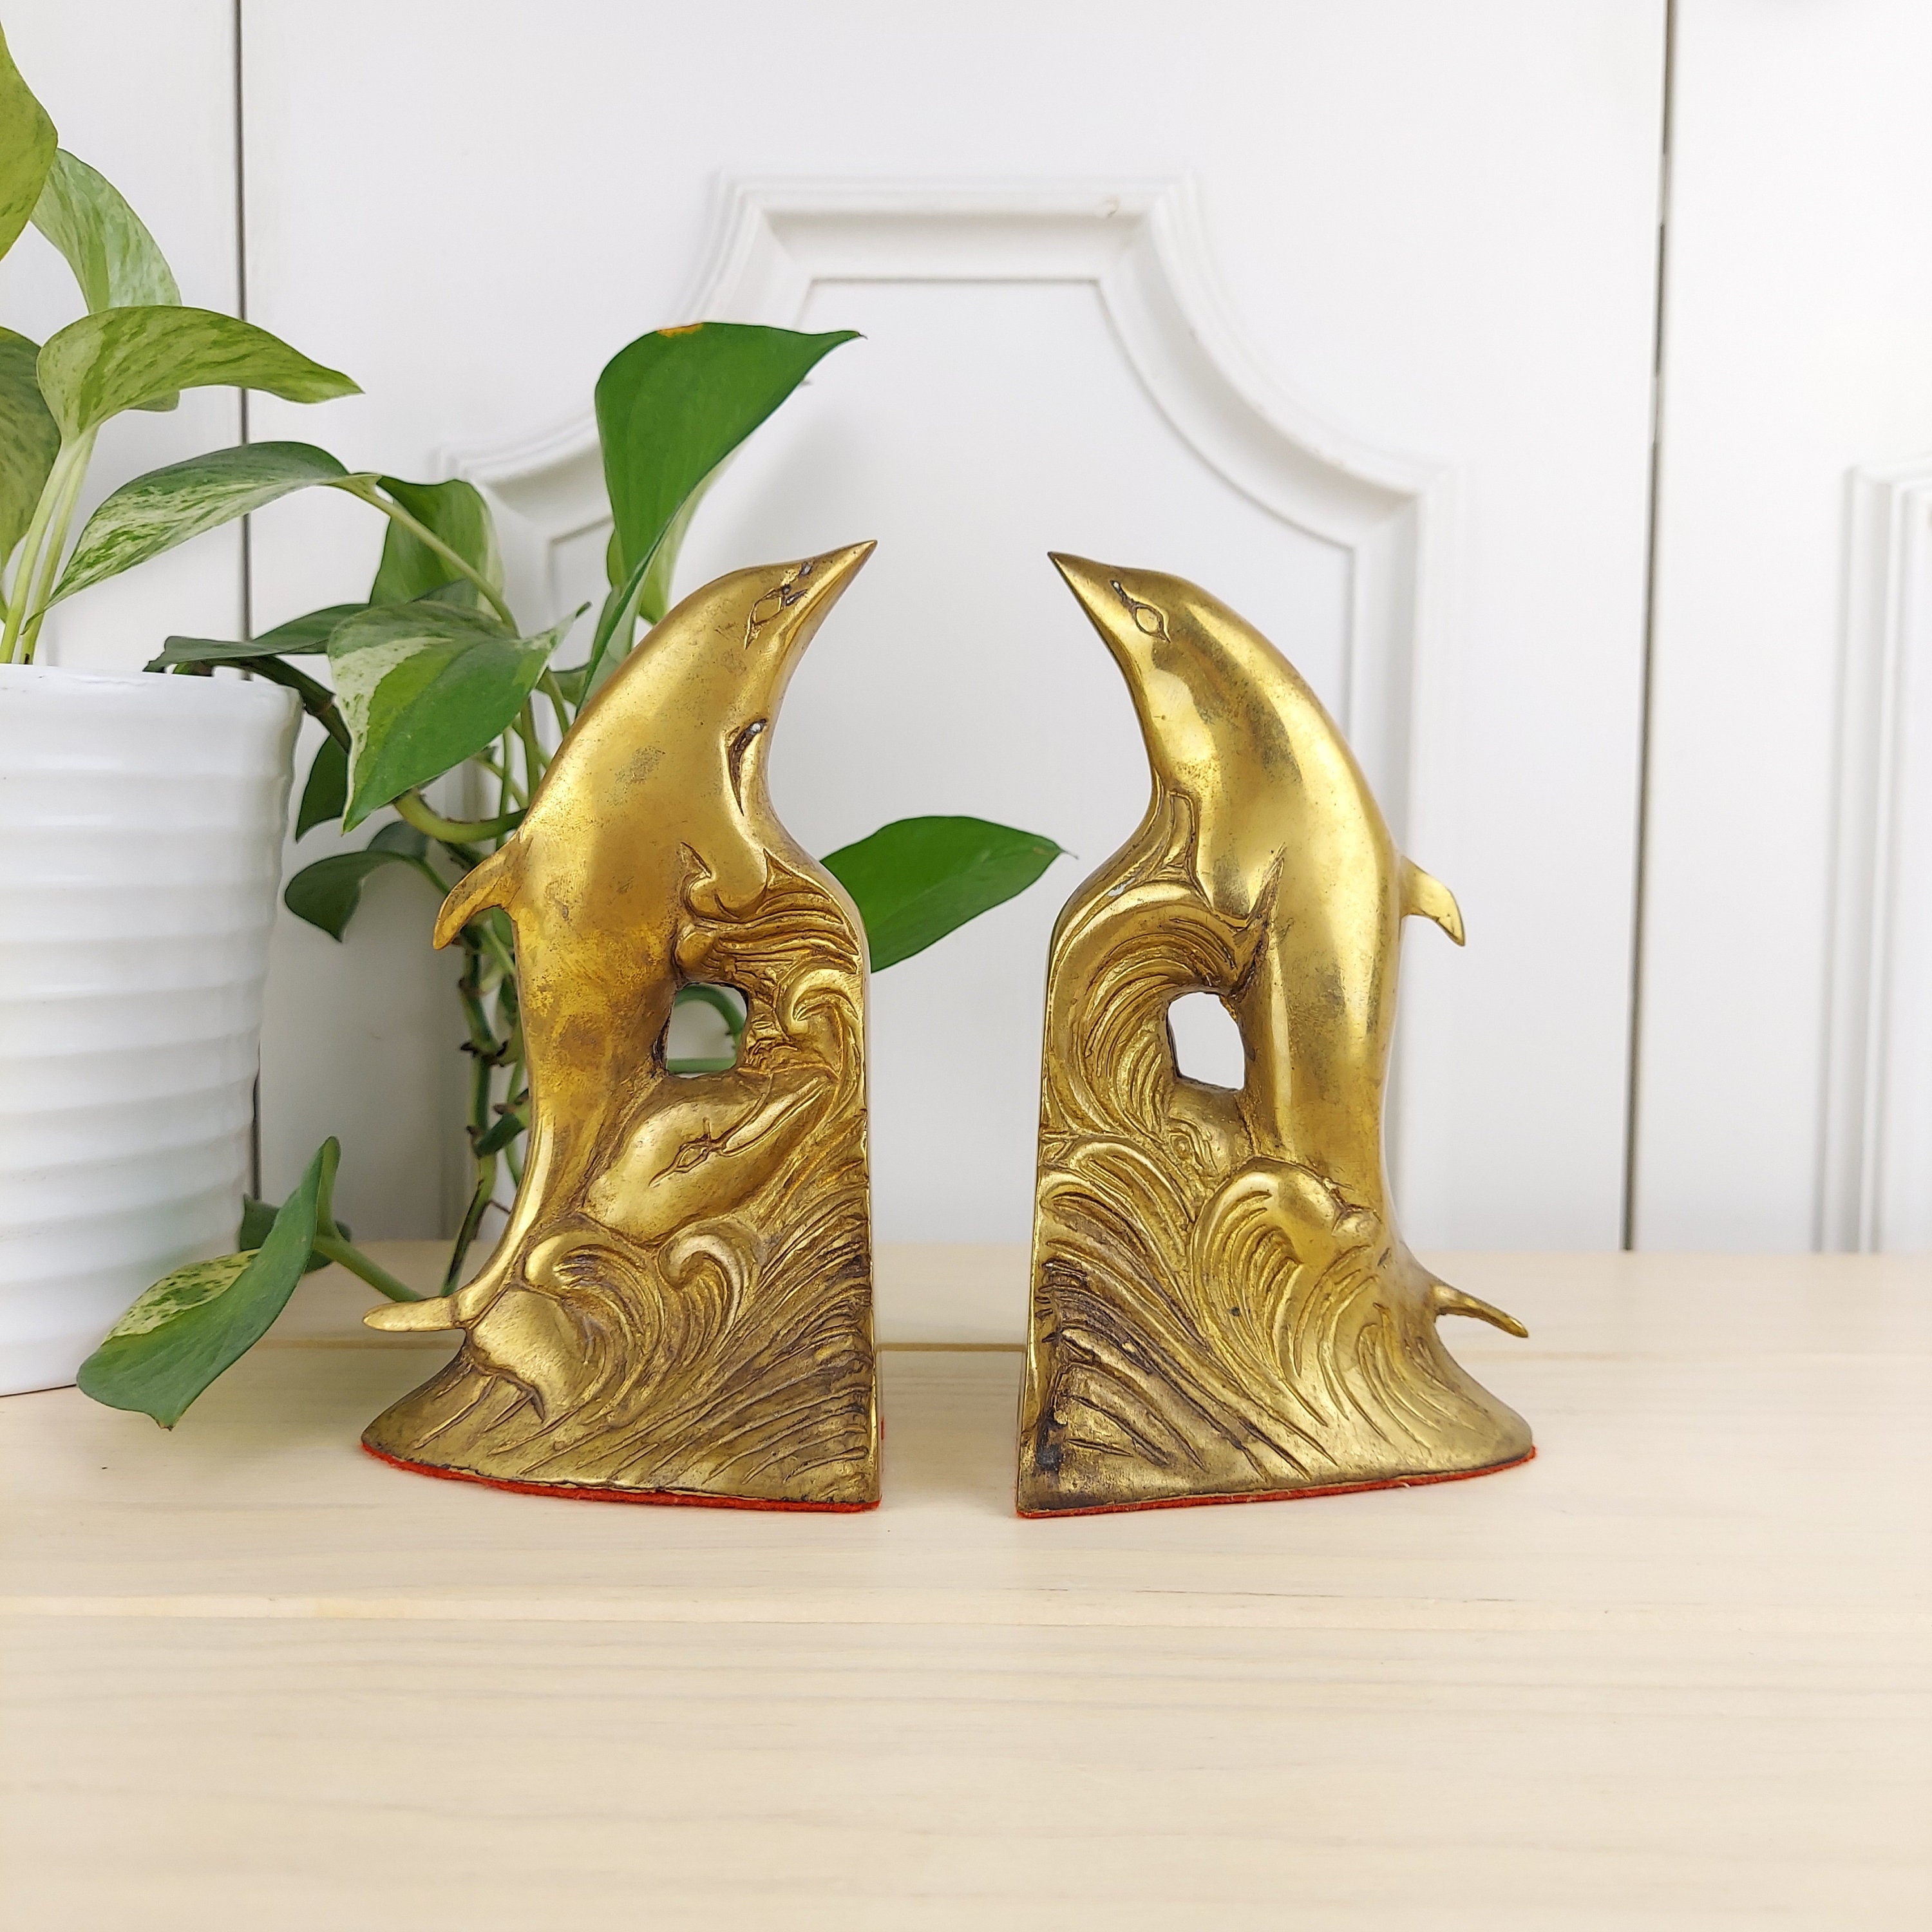 Set of 2 Vintage Solid Brass Dolphin Bookends, Solid Brass Bookends 